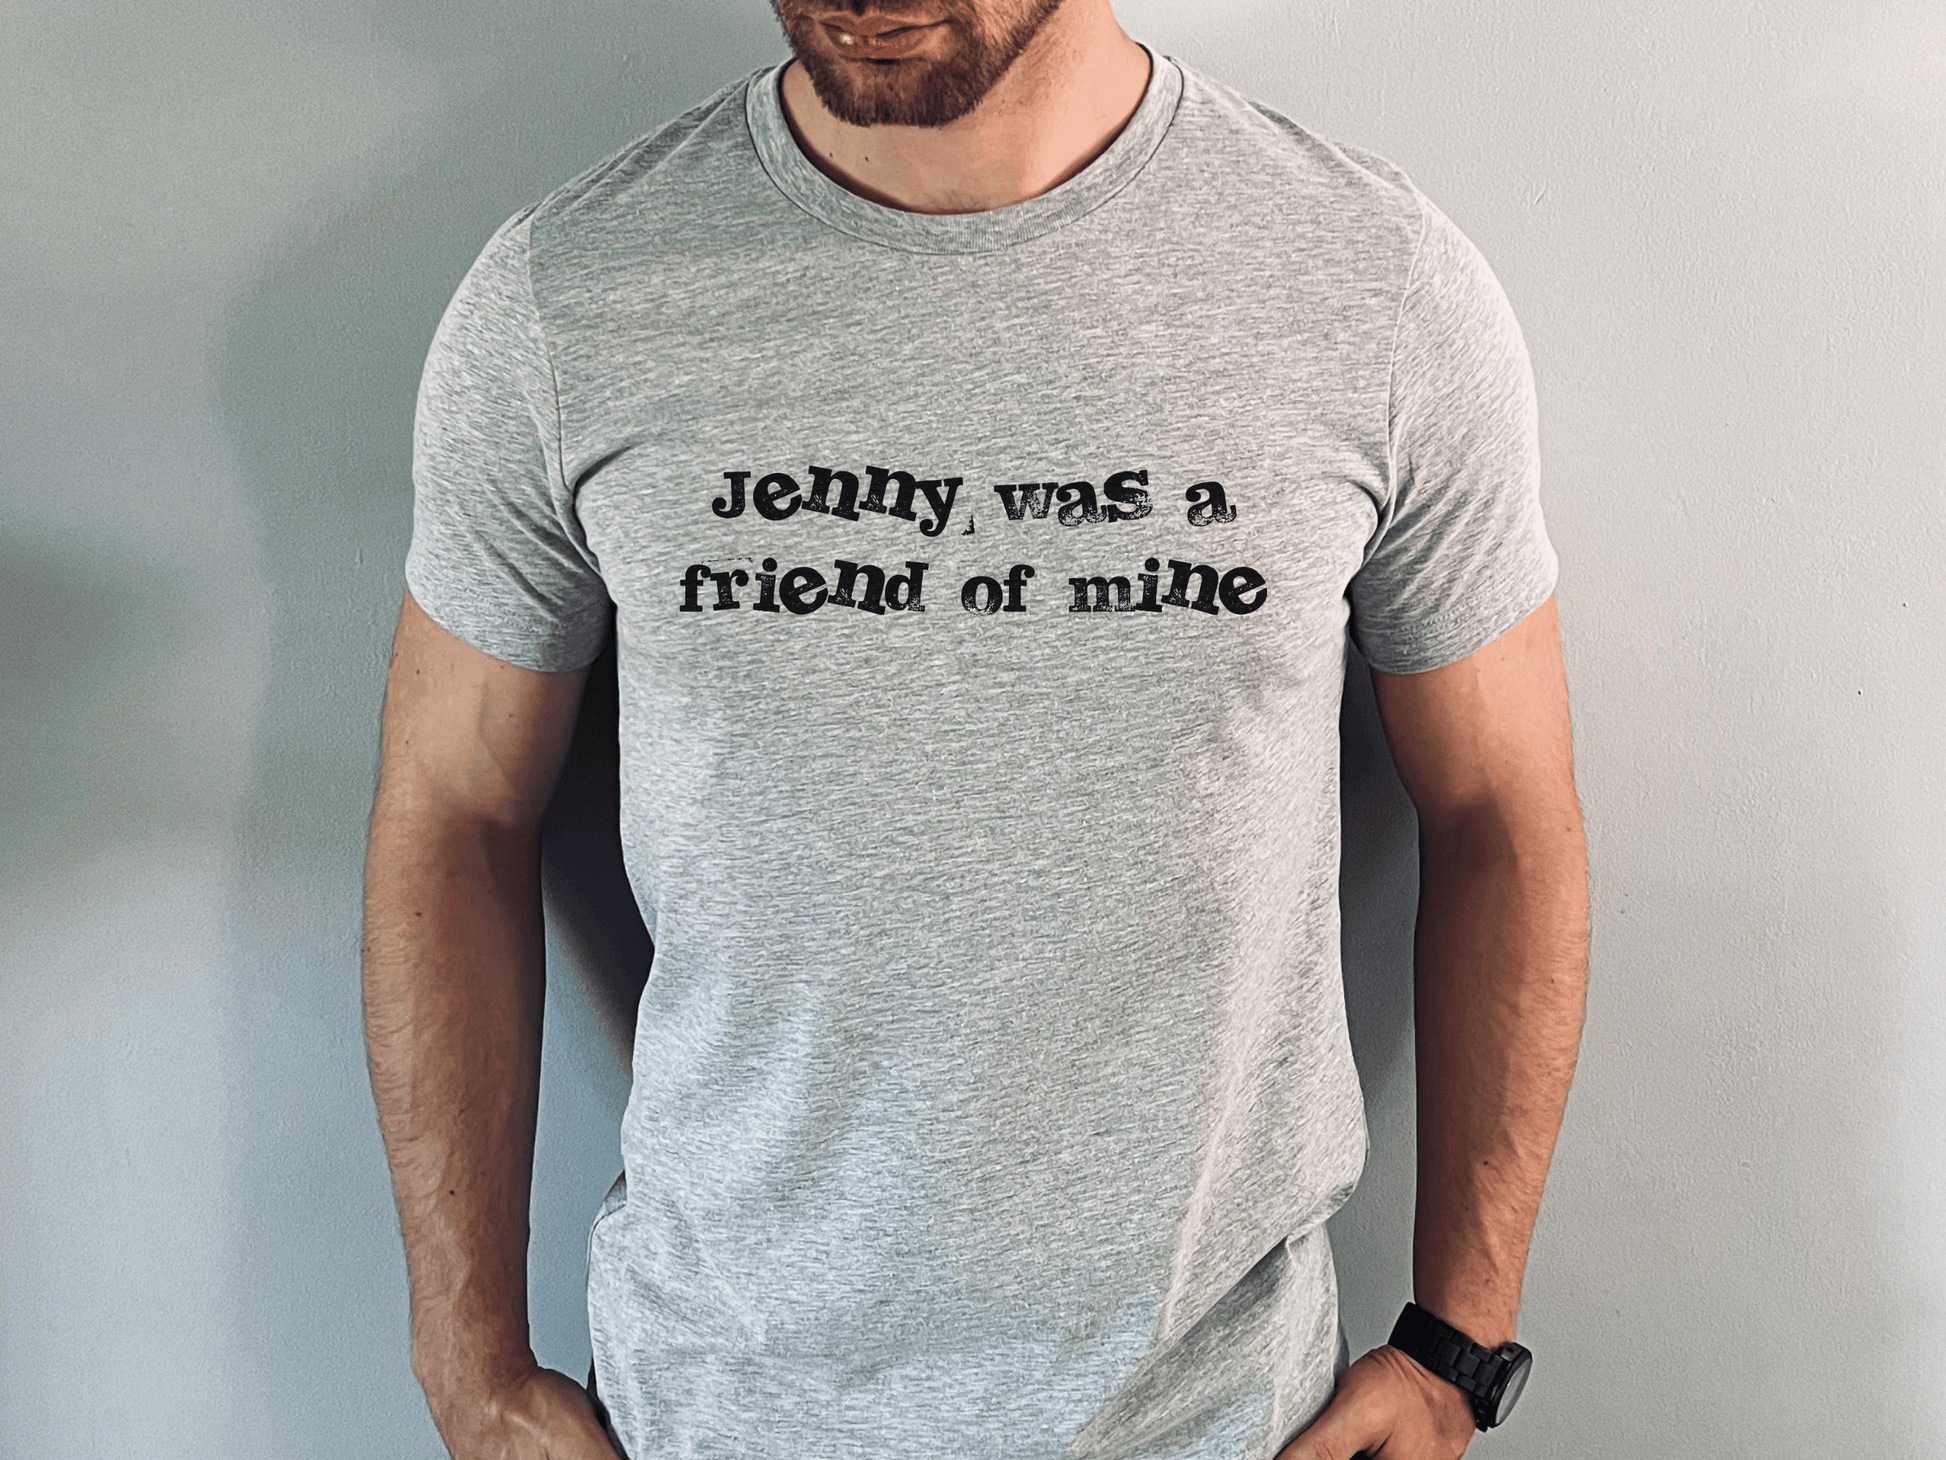 The Killers "Jenny was a Friend of Mine" T-Shirt in Athletic Heather on a male